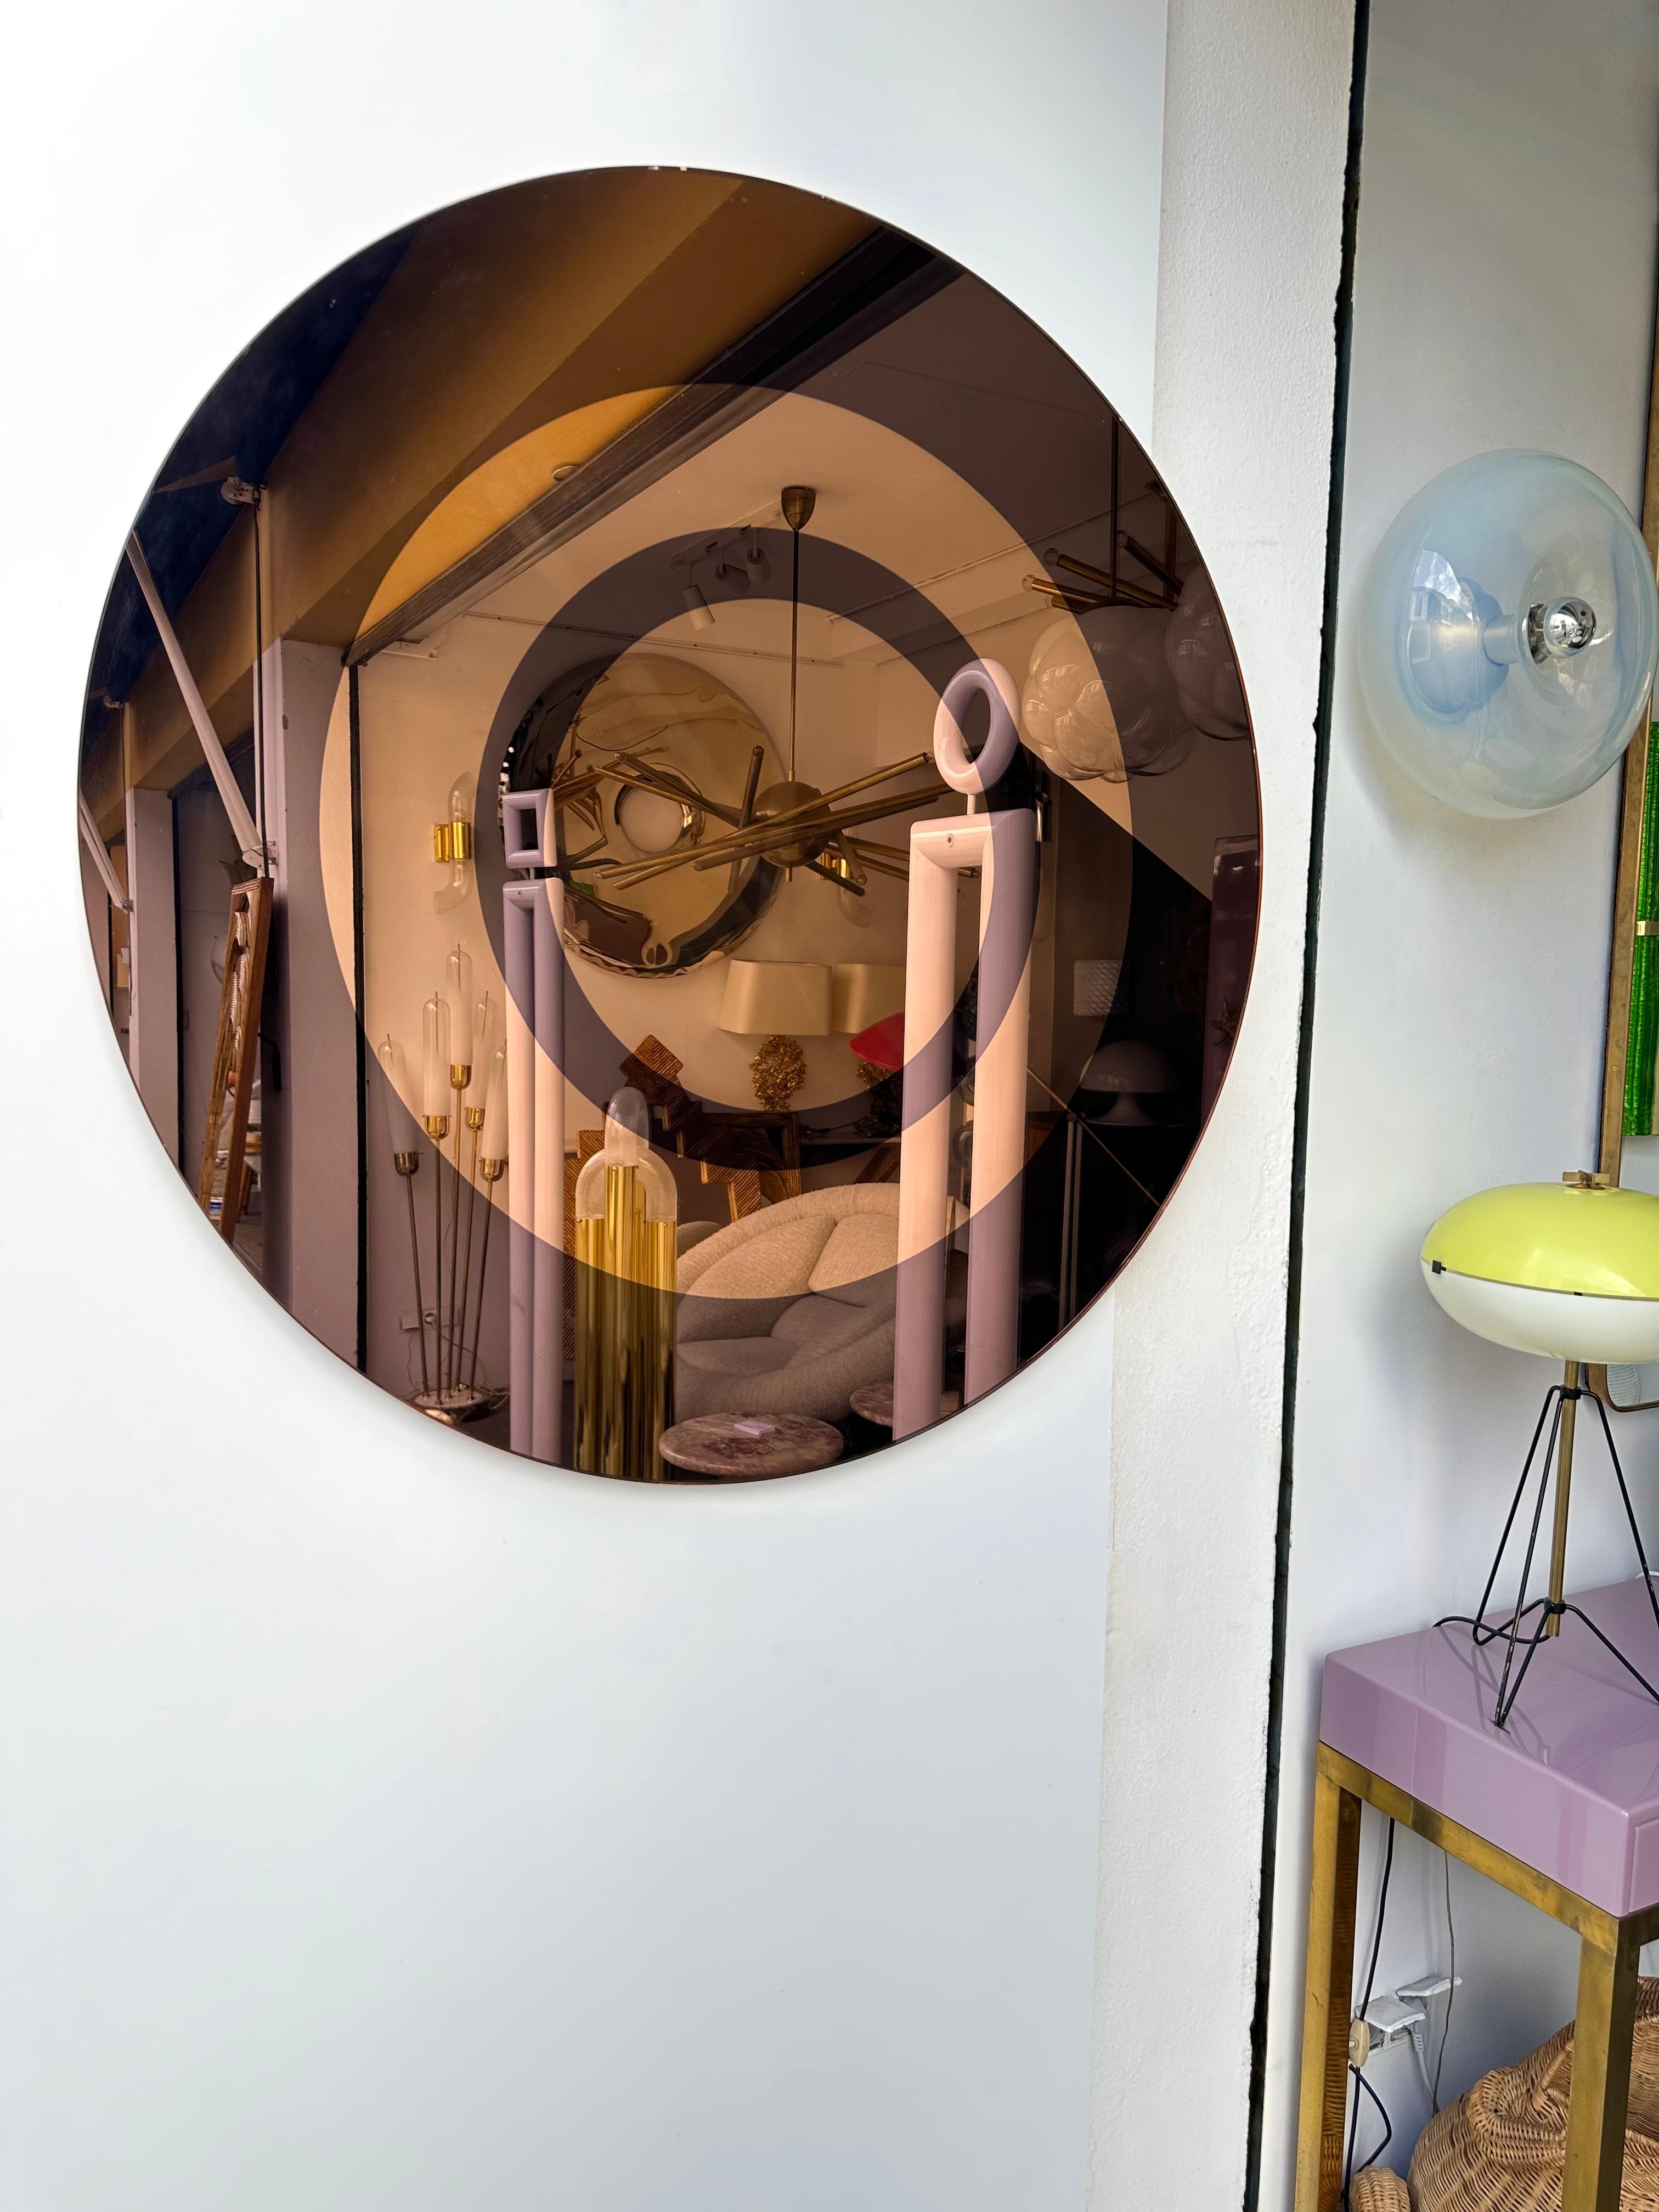 Rare round circle wall mirror by the italian design manufacture Cristal Art in Torino. Smoke brown goldish copper gold colored glass. The piece is referenced in the Cristal Art book. Famous manufacture like Fontana Arte.